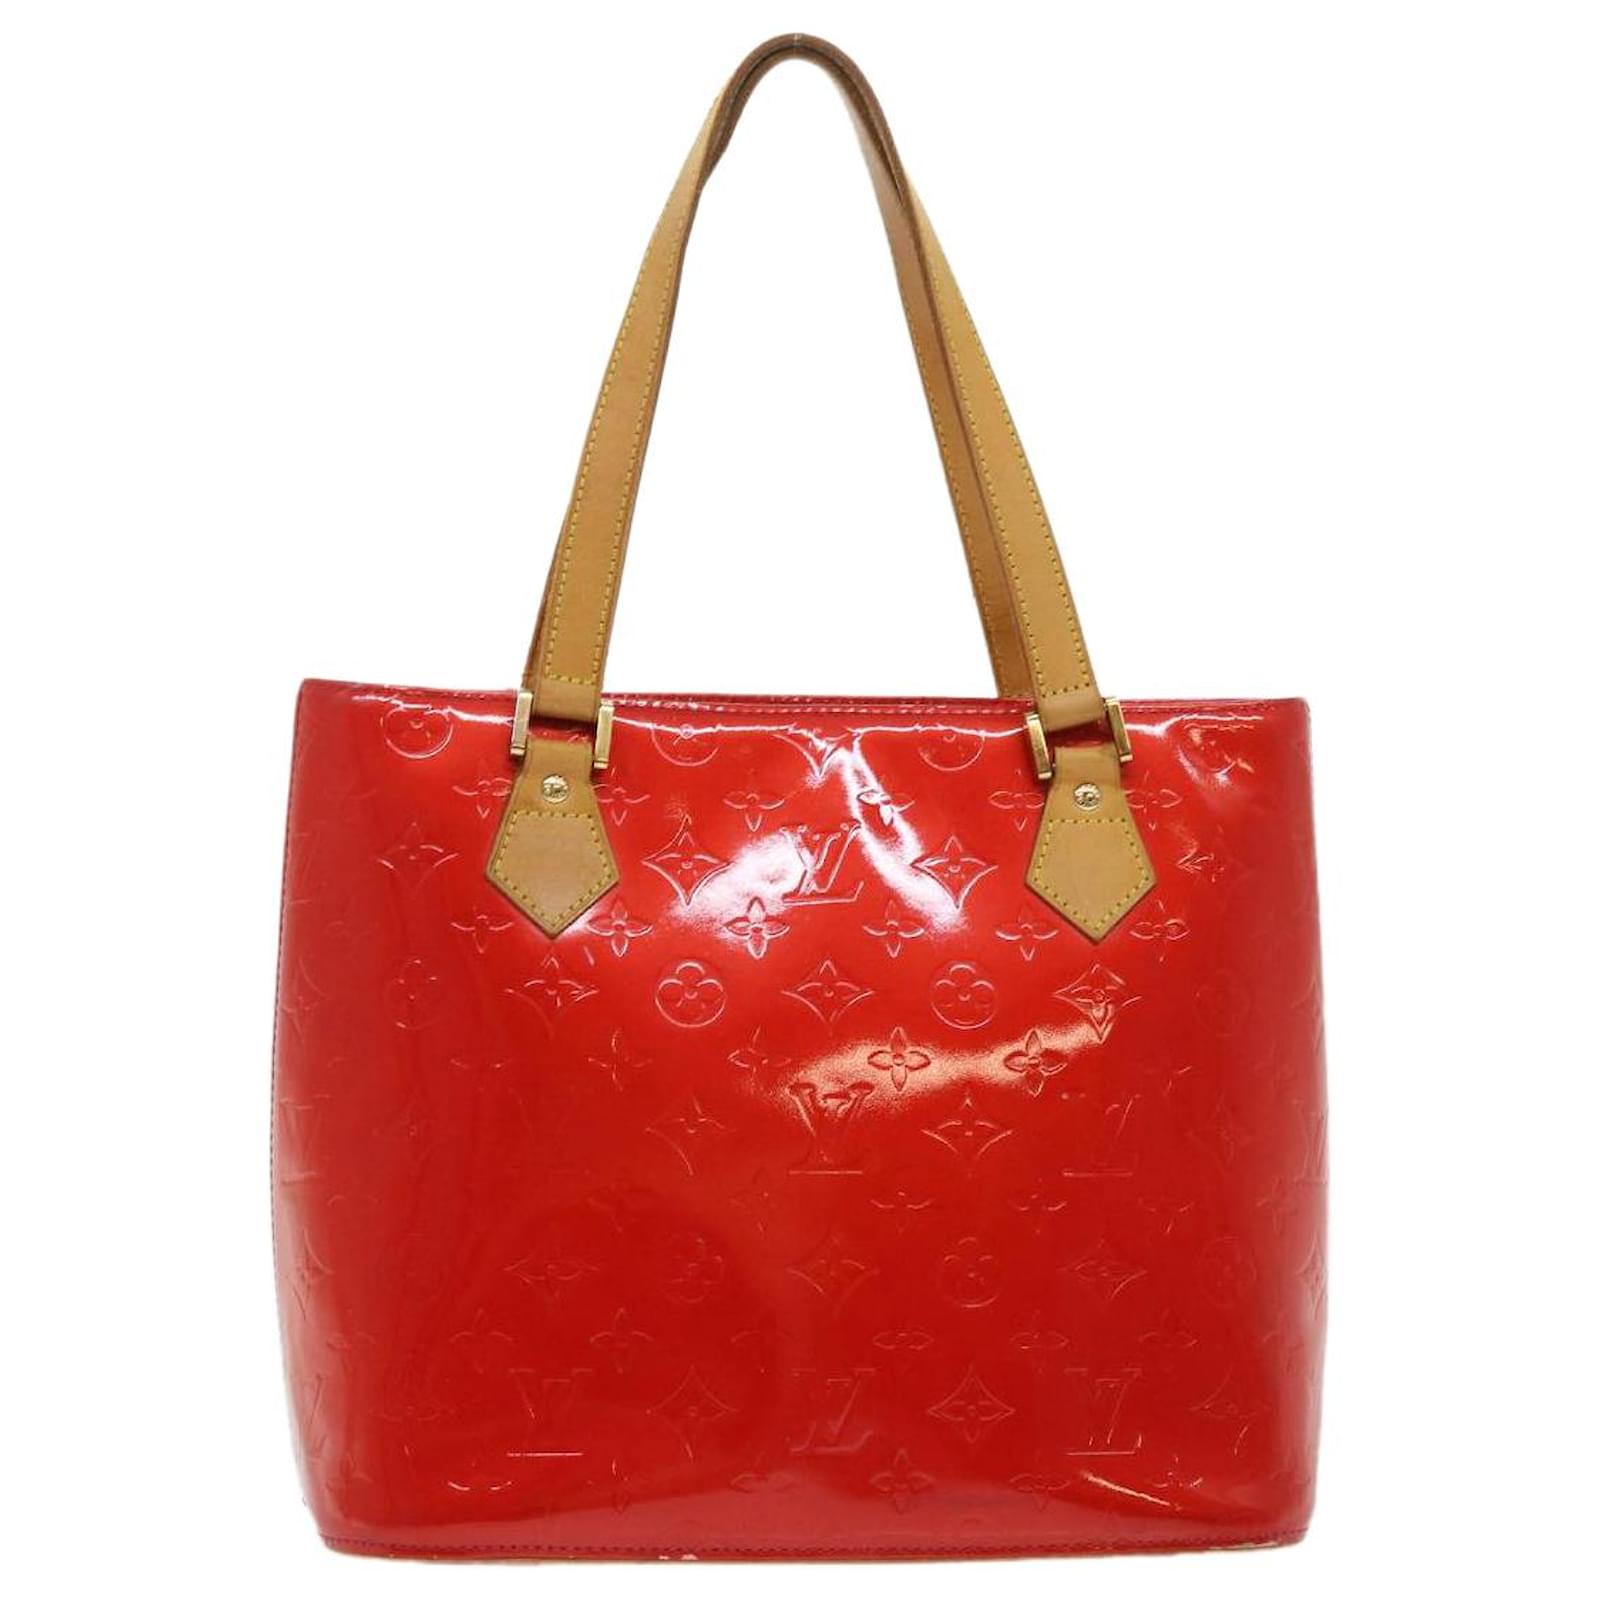 Louis Vuitton Houston Red Patent Leather Handbag (Pre-Owned)